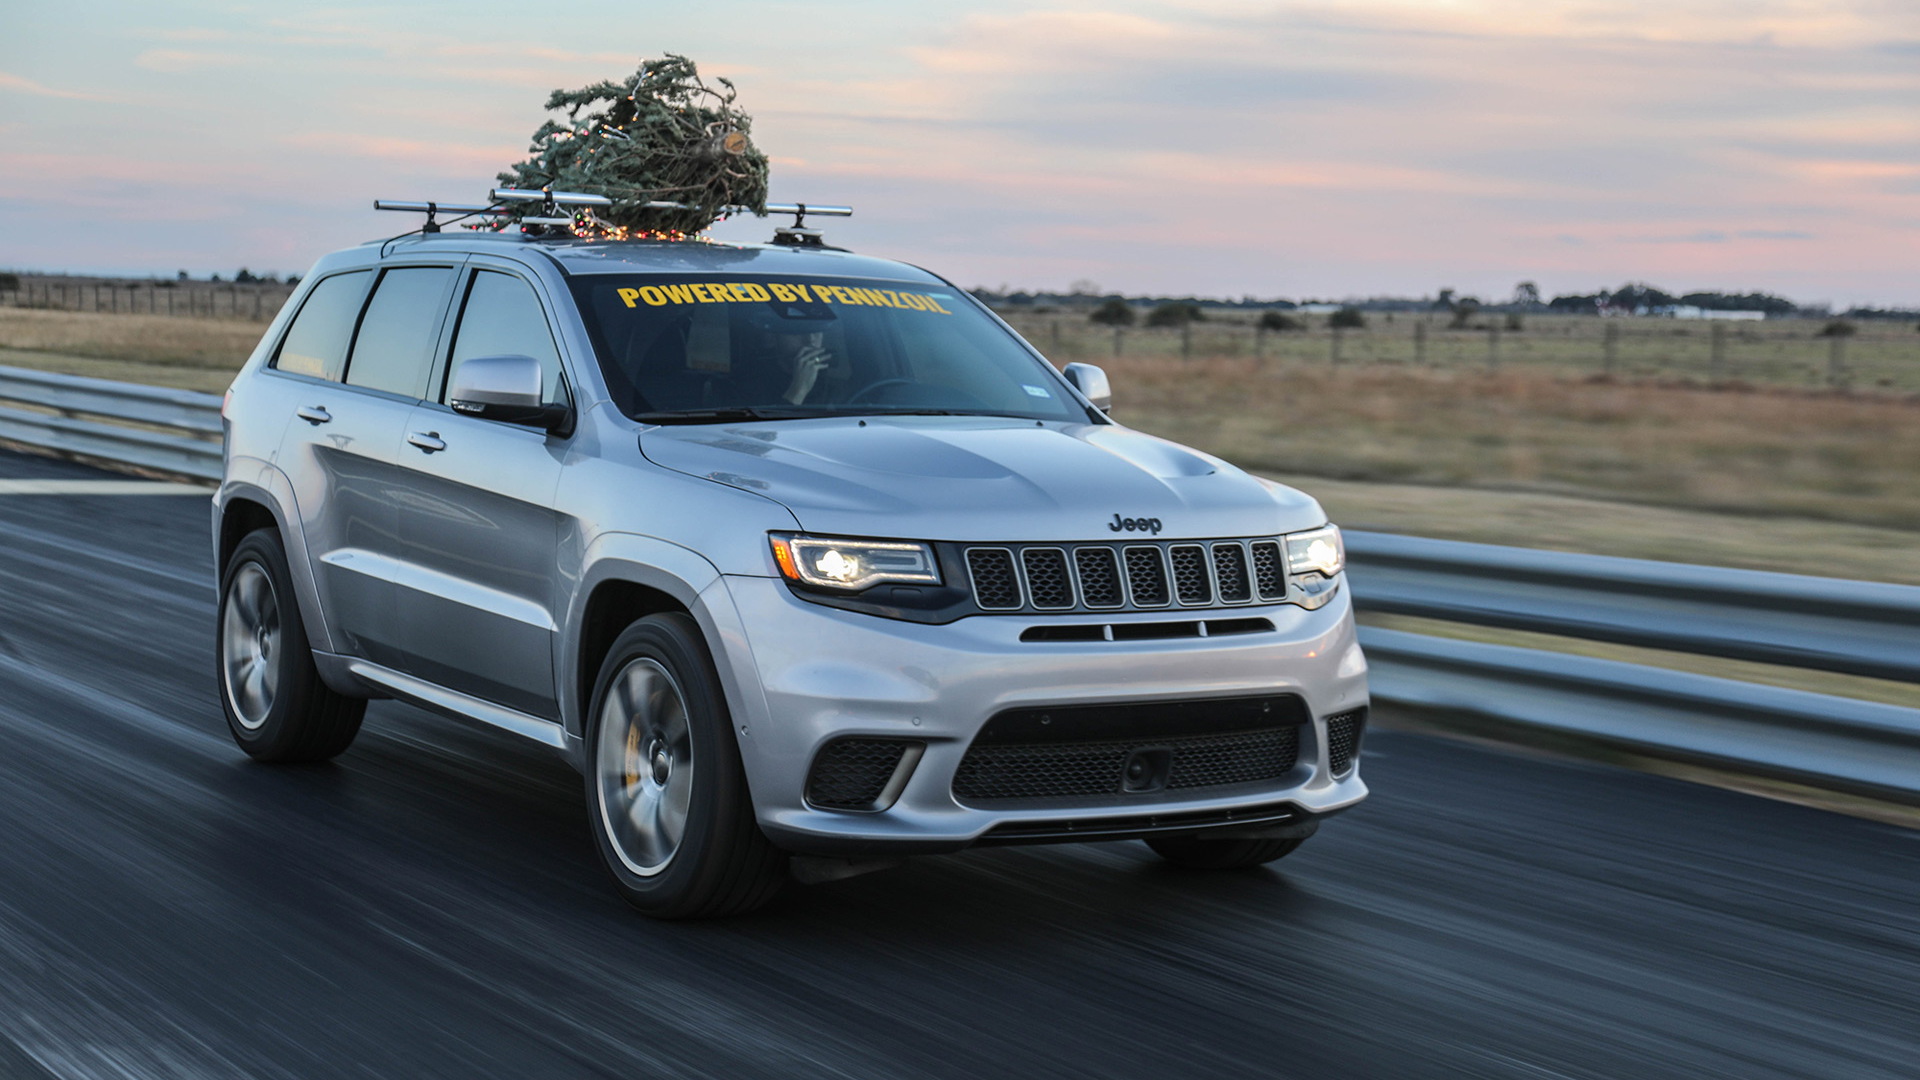 Christmas tree reaches 181 mph strapped to a Hennessey-tuned Jeep Grand Cherokee Trackhawk